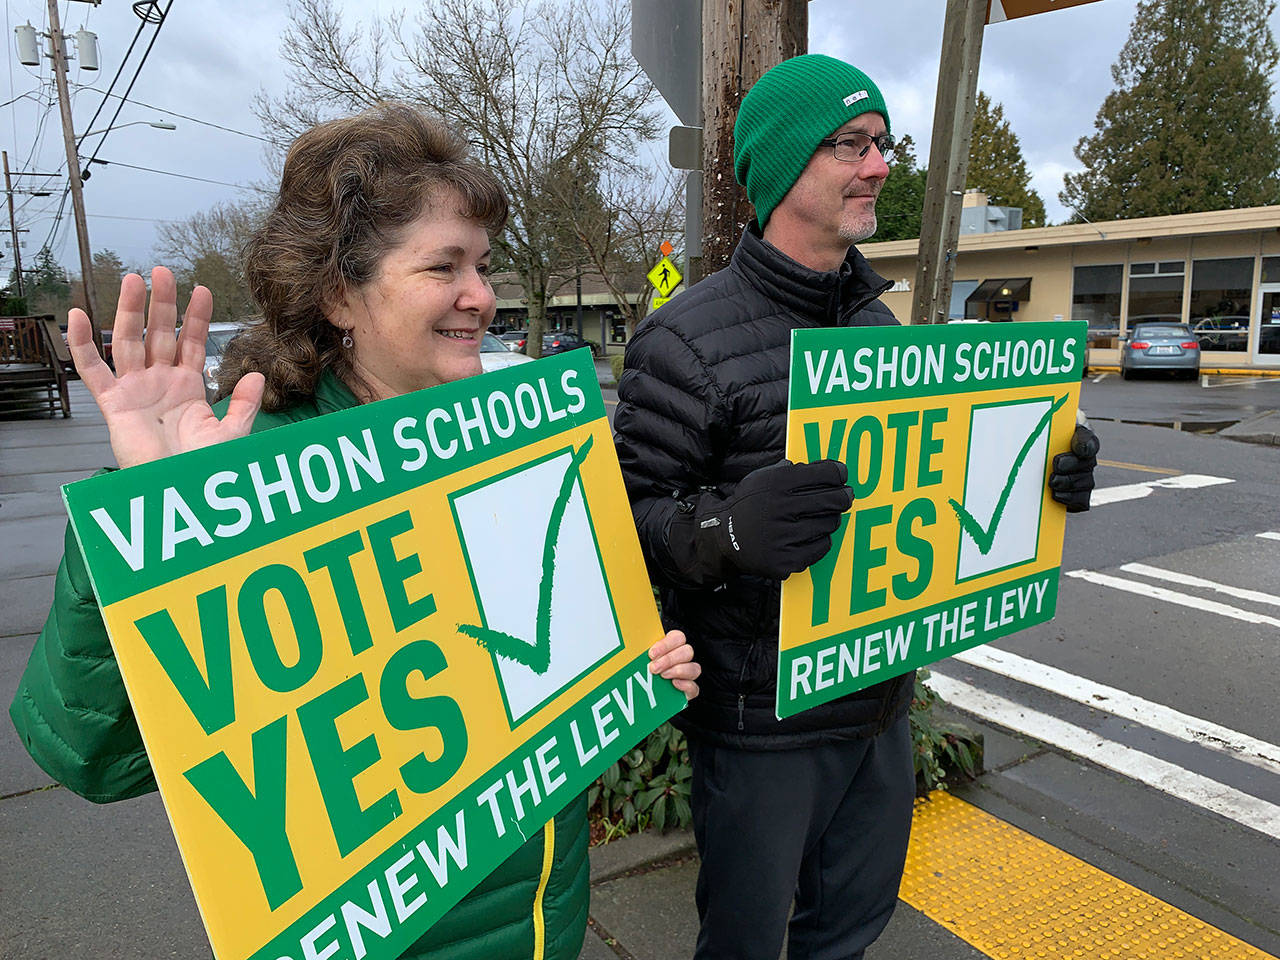 Kevin Opsahl/Staff Photo                                Rheagan Sparks, chairwoman of the Vashon Island School District board of directors, and district superintendent Slade McSheehy told signs supporting the Cap/Tech levy on Saturday, Feb. 8, just days before the special election on Tuesday.